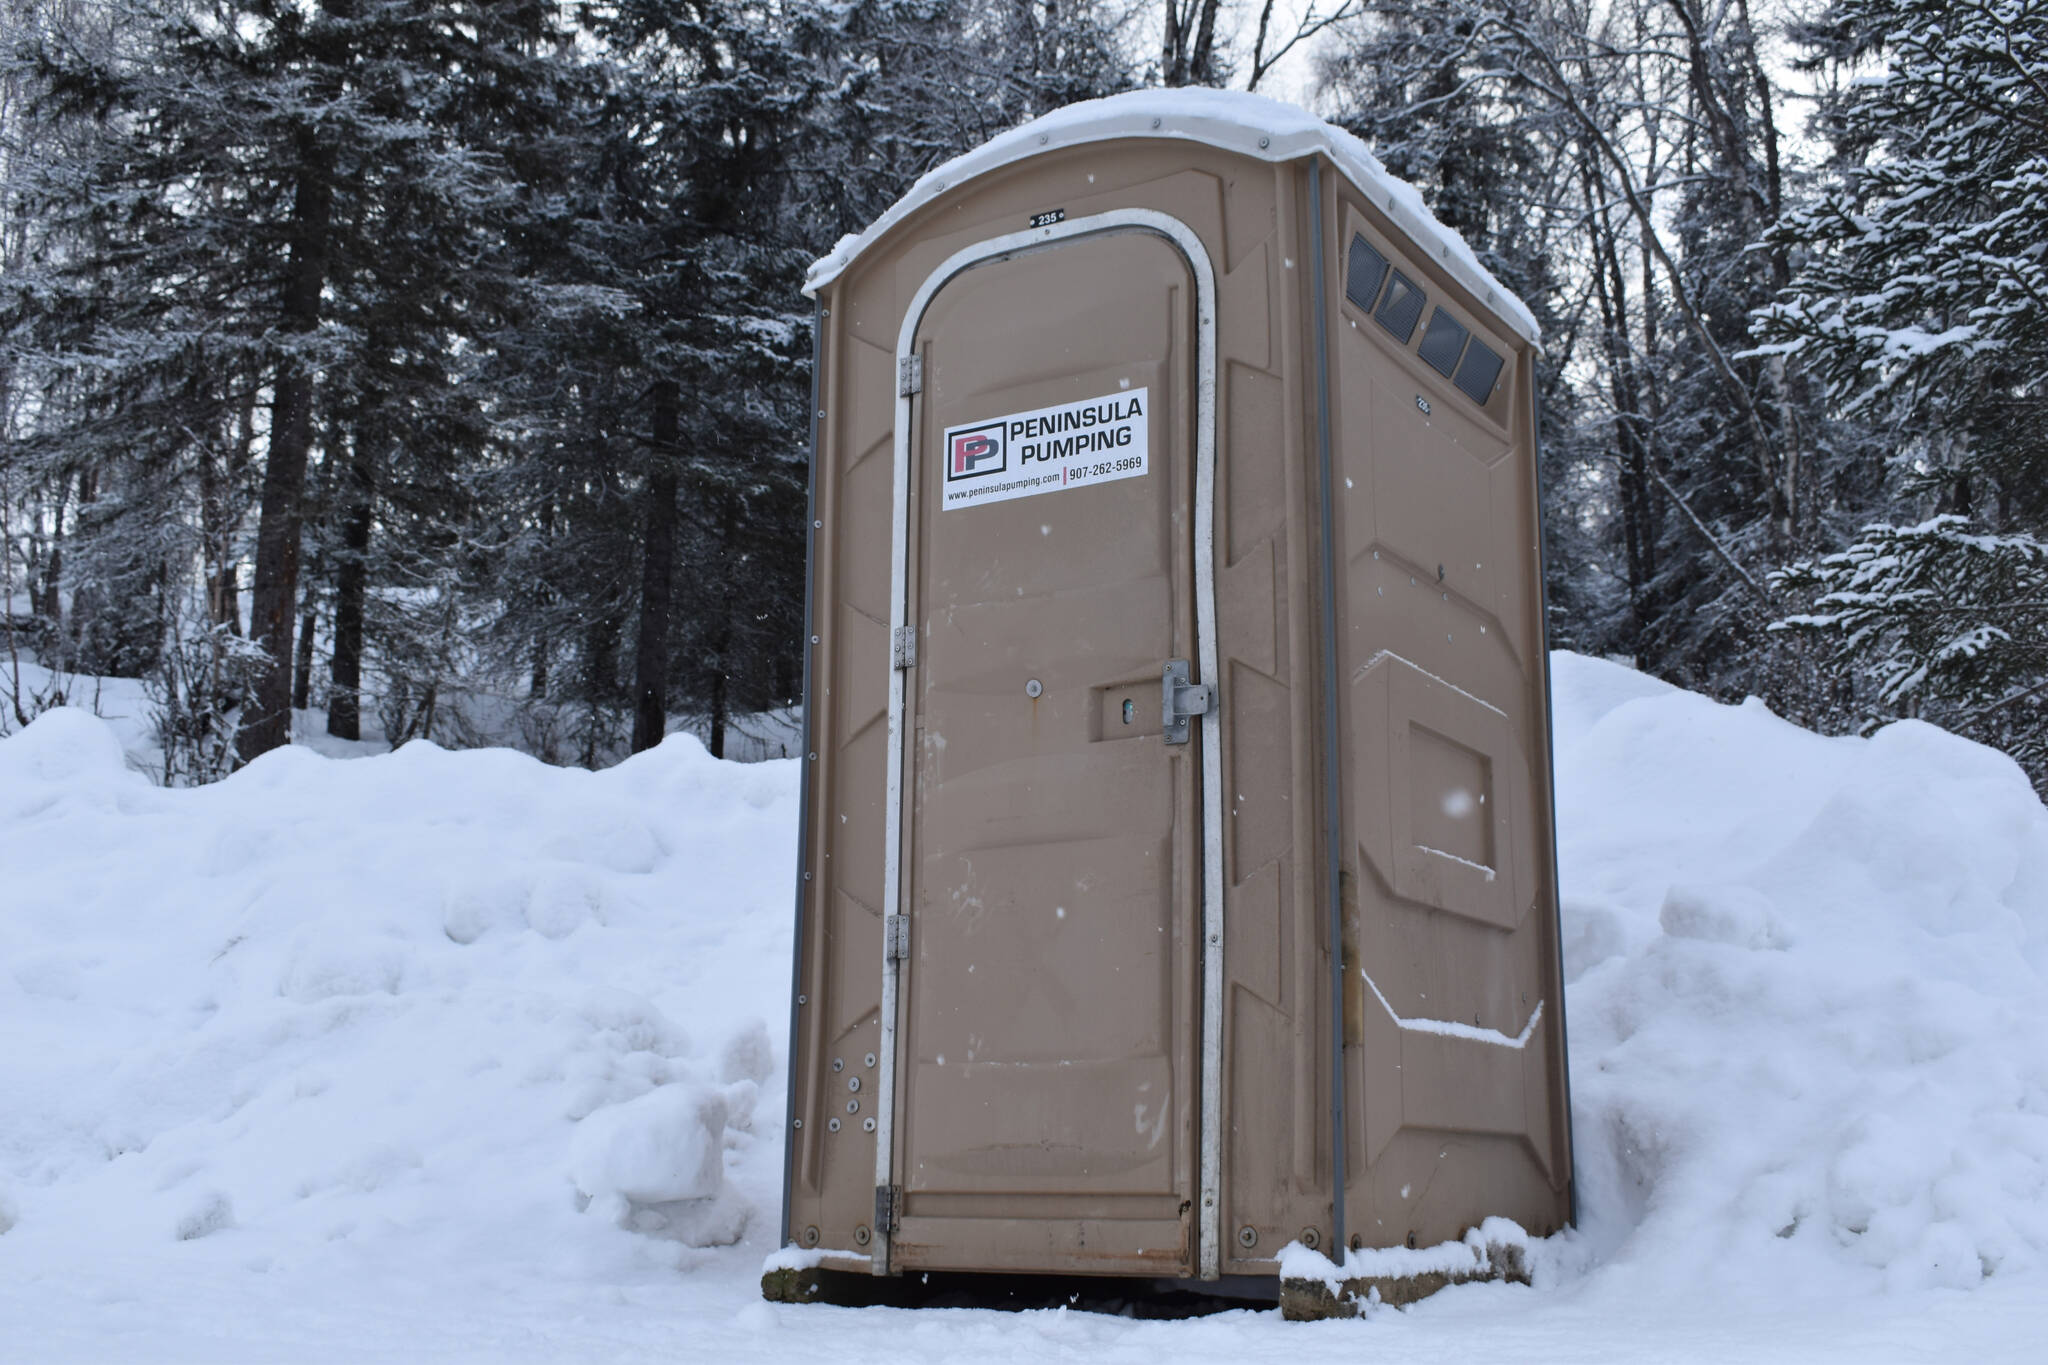 A recently added port-a-potty is available in the parking lot of Slikok Multi-Use Trails on Thursday, Feb. 2, 2023, in Soldotna, Alaska. (Jake Dye/Peninsula Clarion)